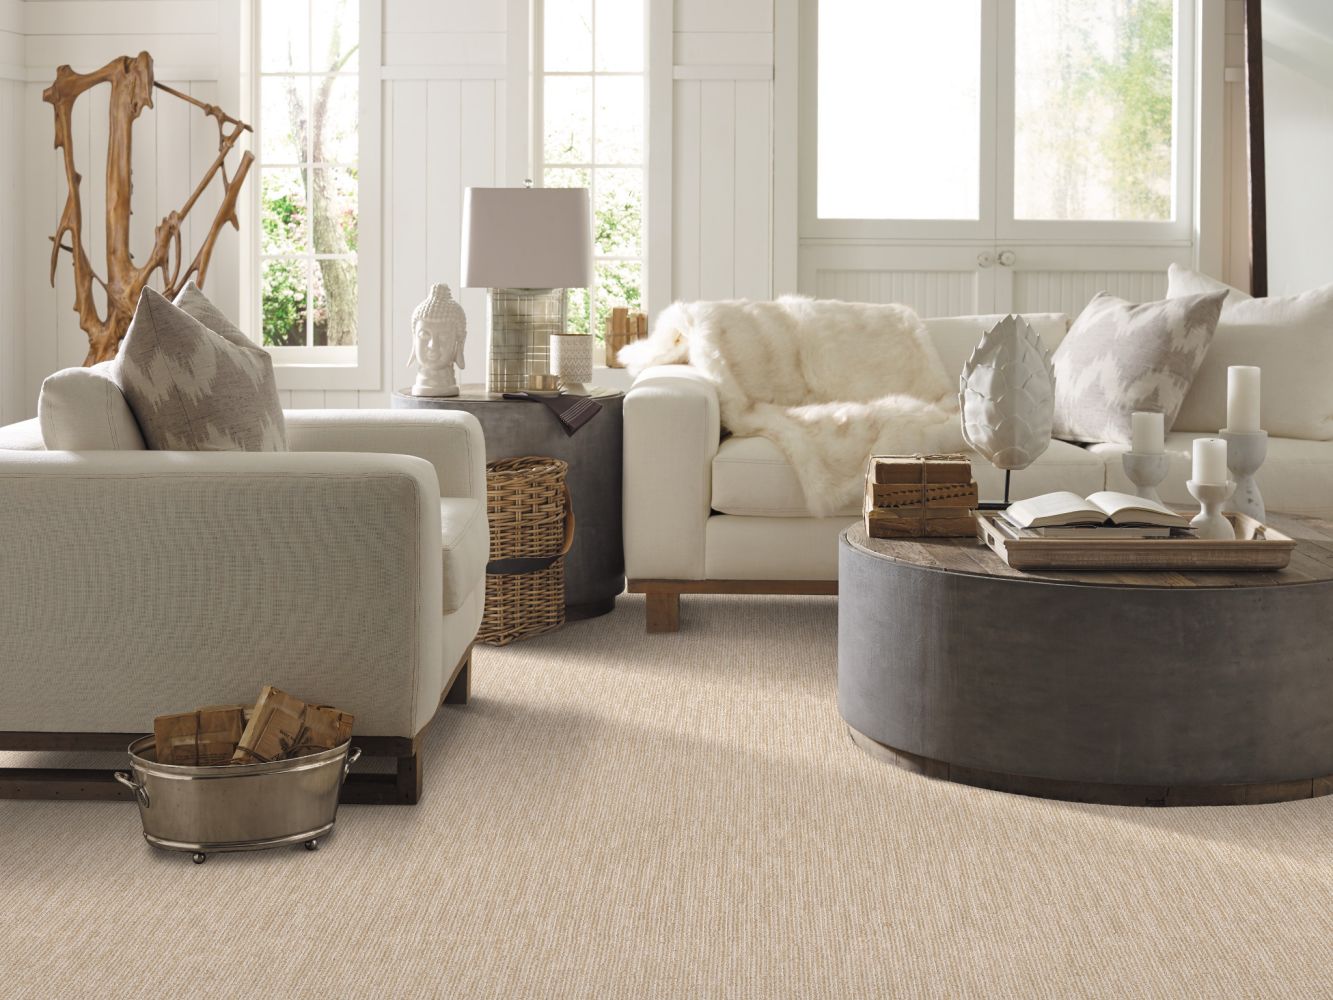 Shaw Floors Simply The Best Evoking Warmth Fuzzy Sheep 00100_EA690